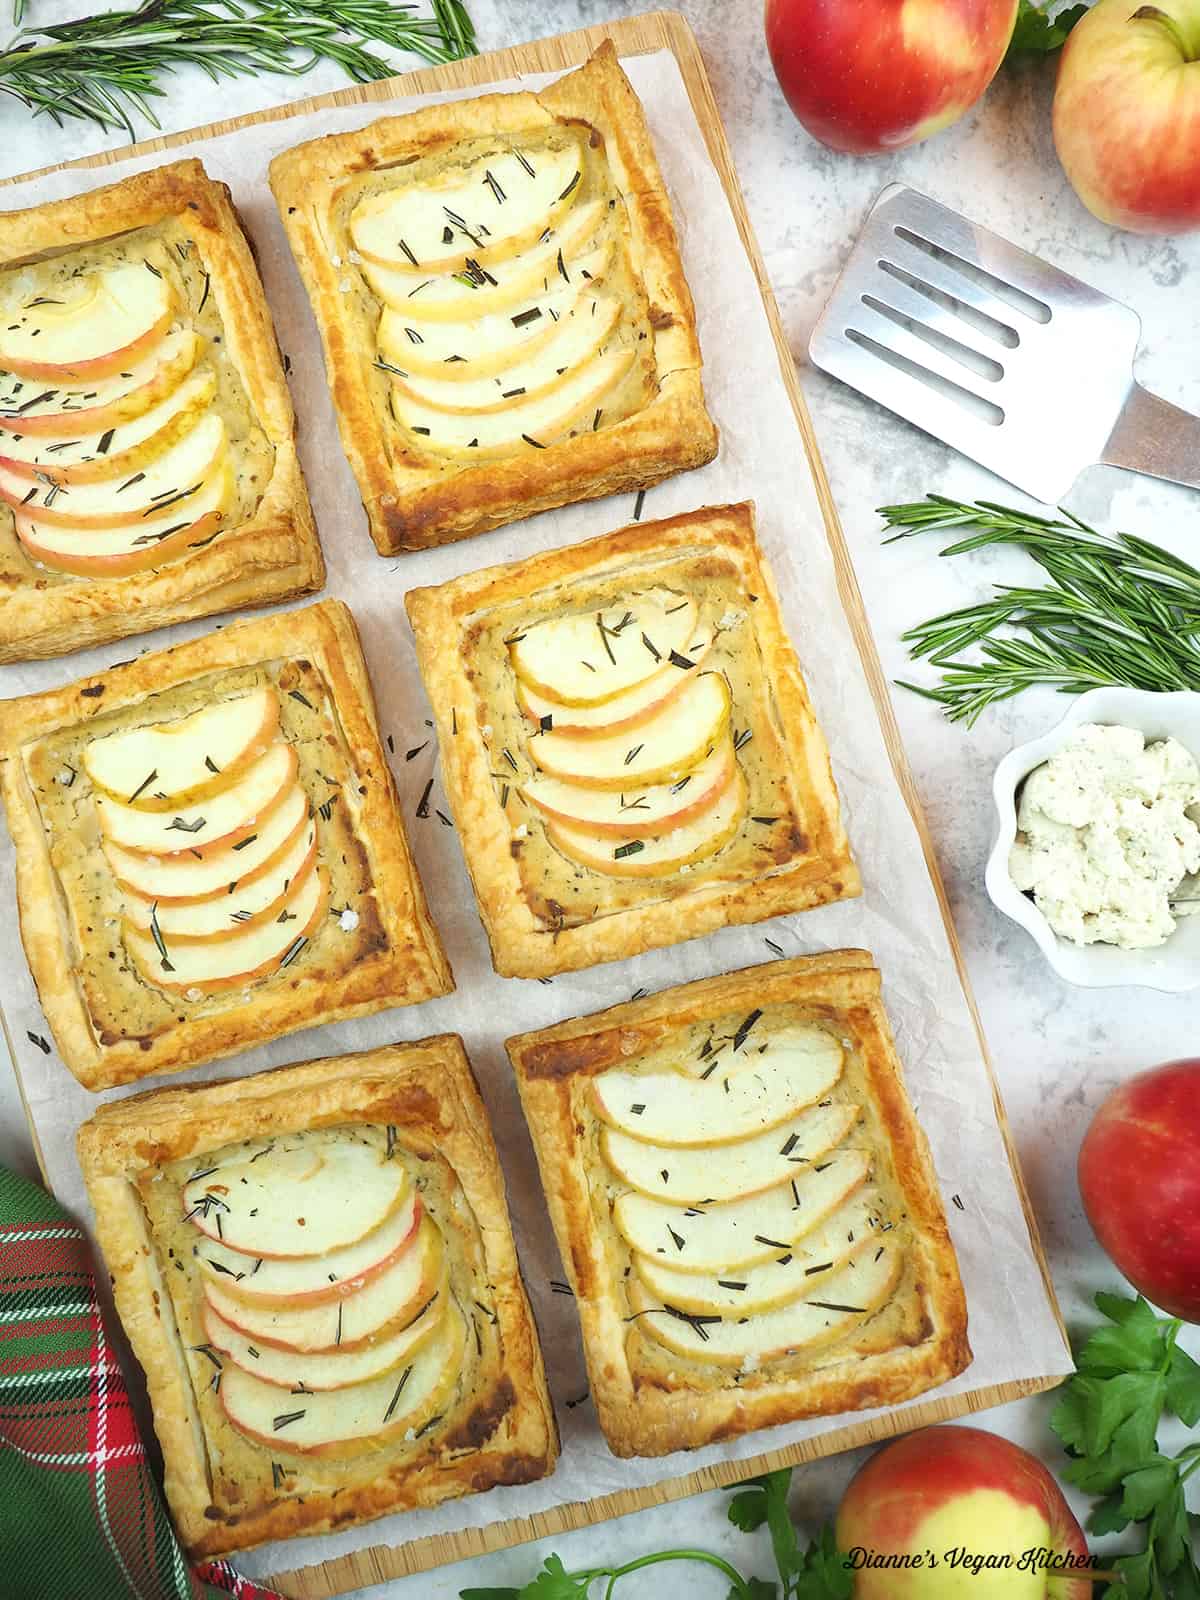 Vegan Apple and Cheese Tarts with apples, cheese, rosemary, and a spatula